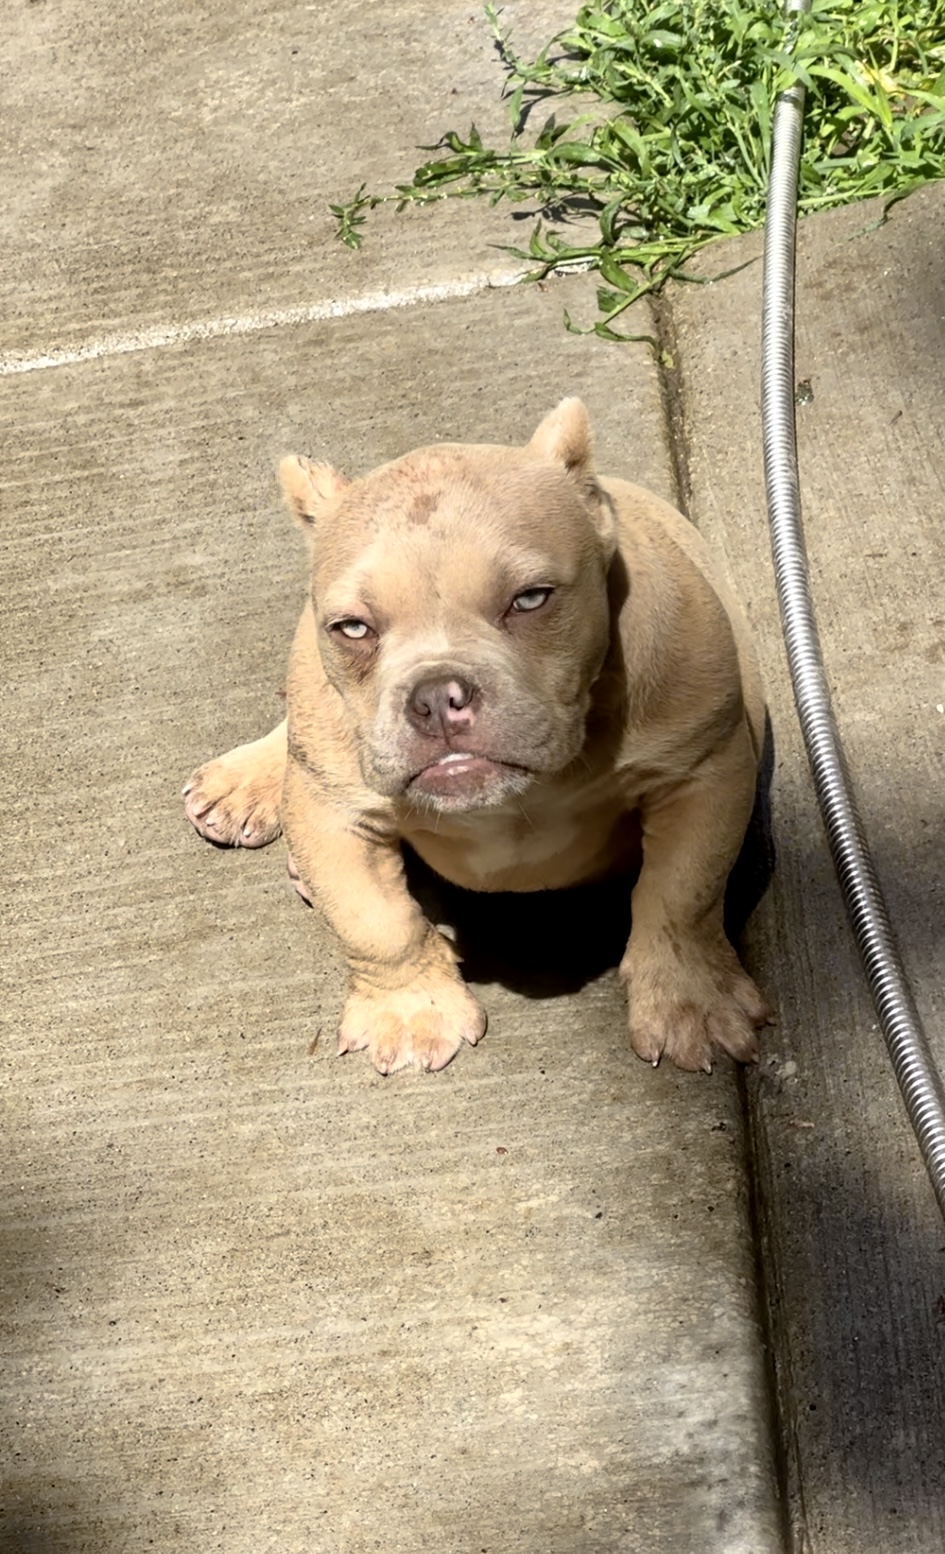 Male Exotic bully puppy for sale.